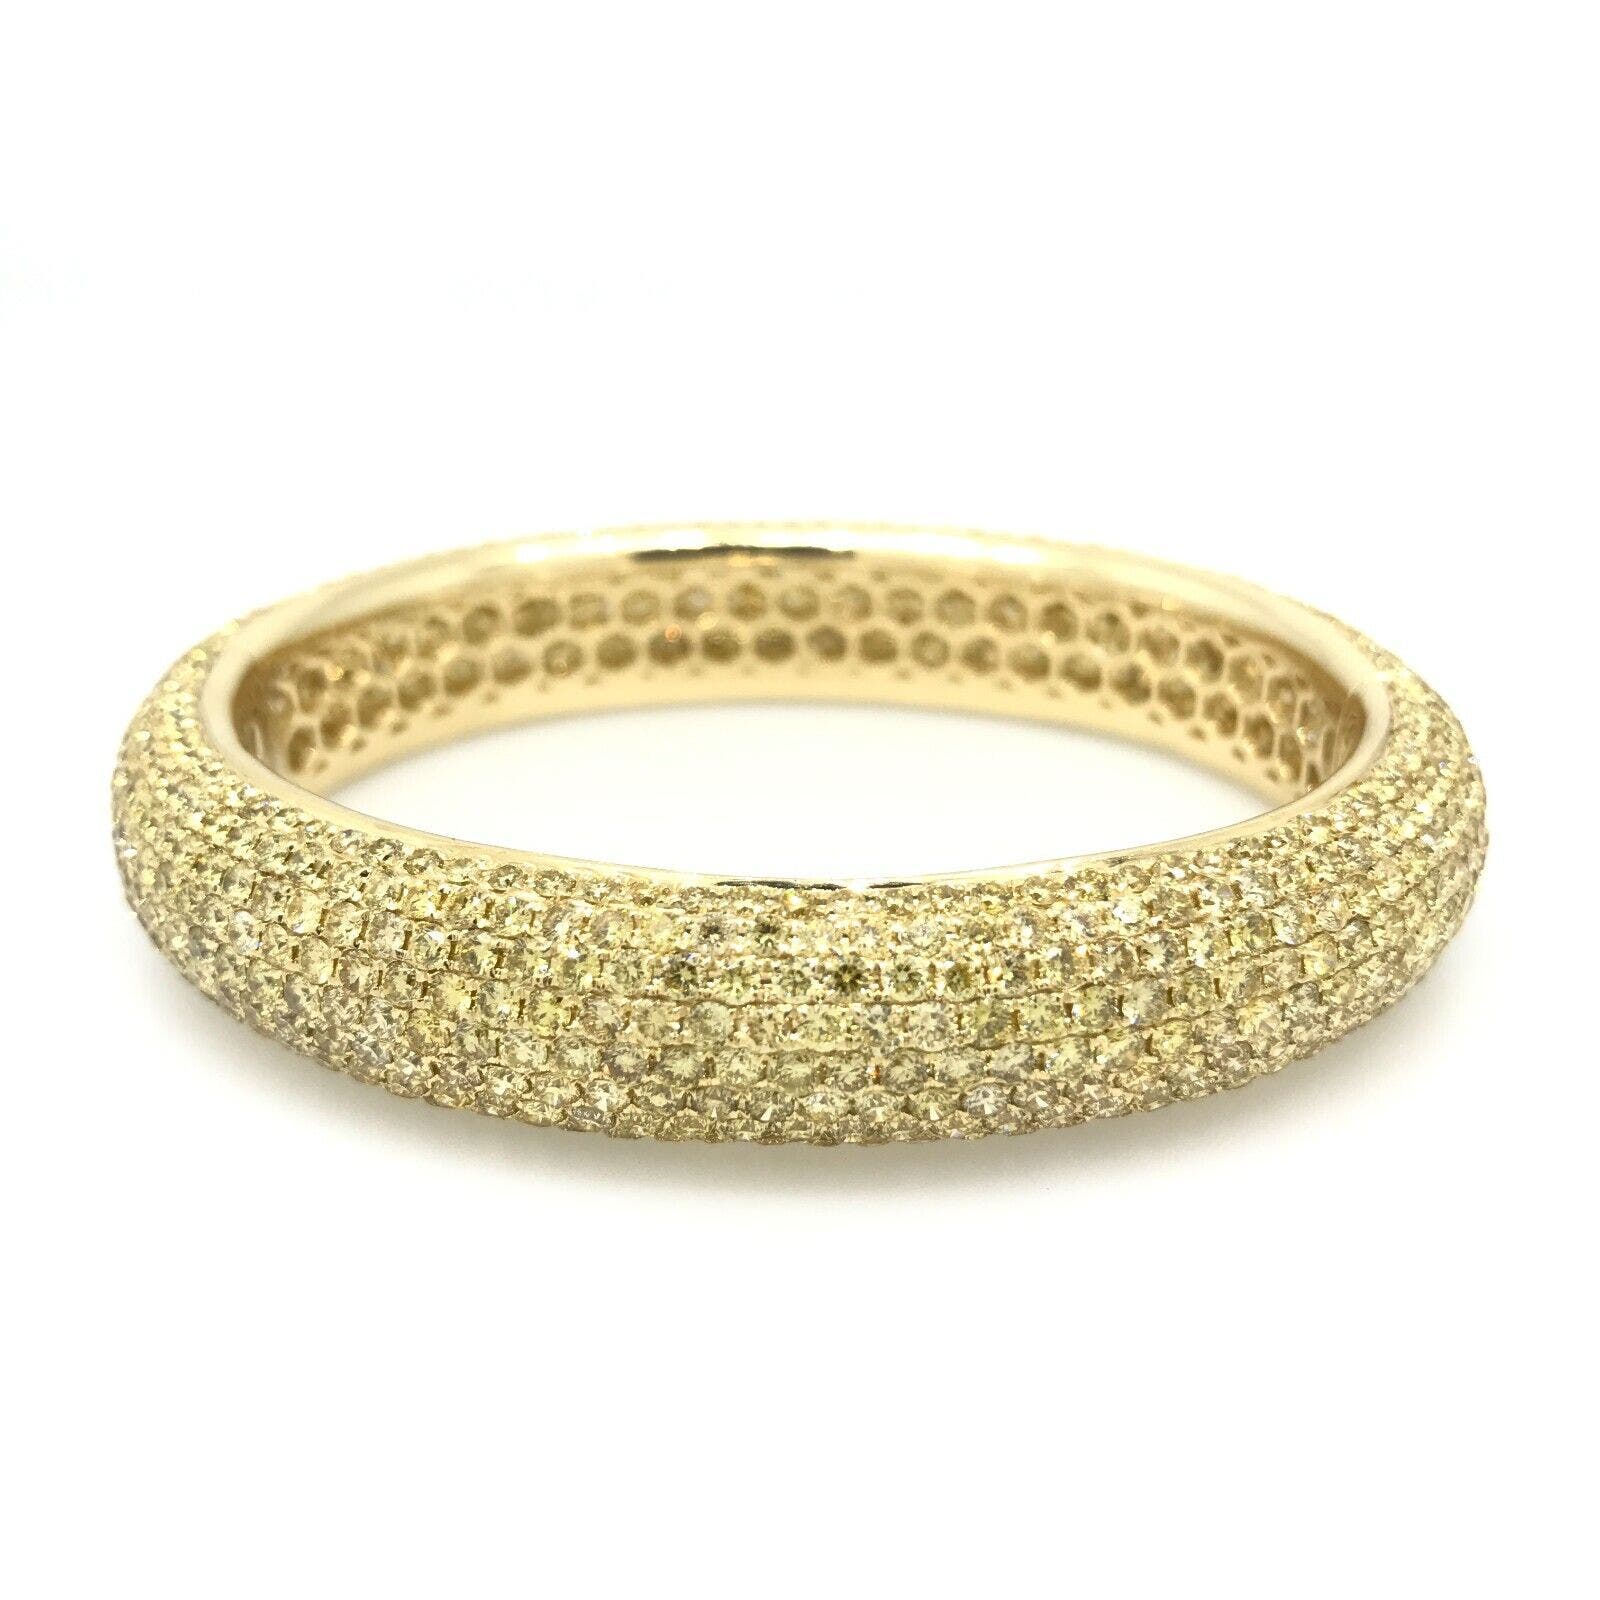 Wide Yellow Diamond Pave Eternity Bracelet 24.36 cttw in 18k Yellow Gold-HM1850A